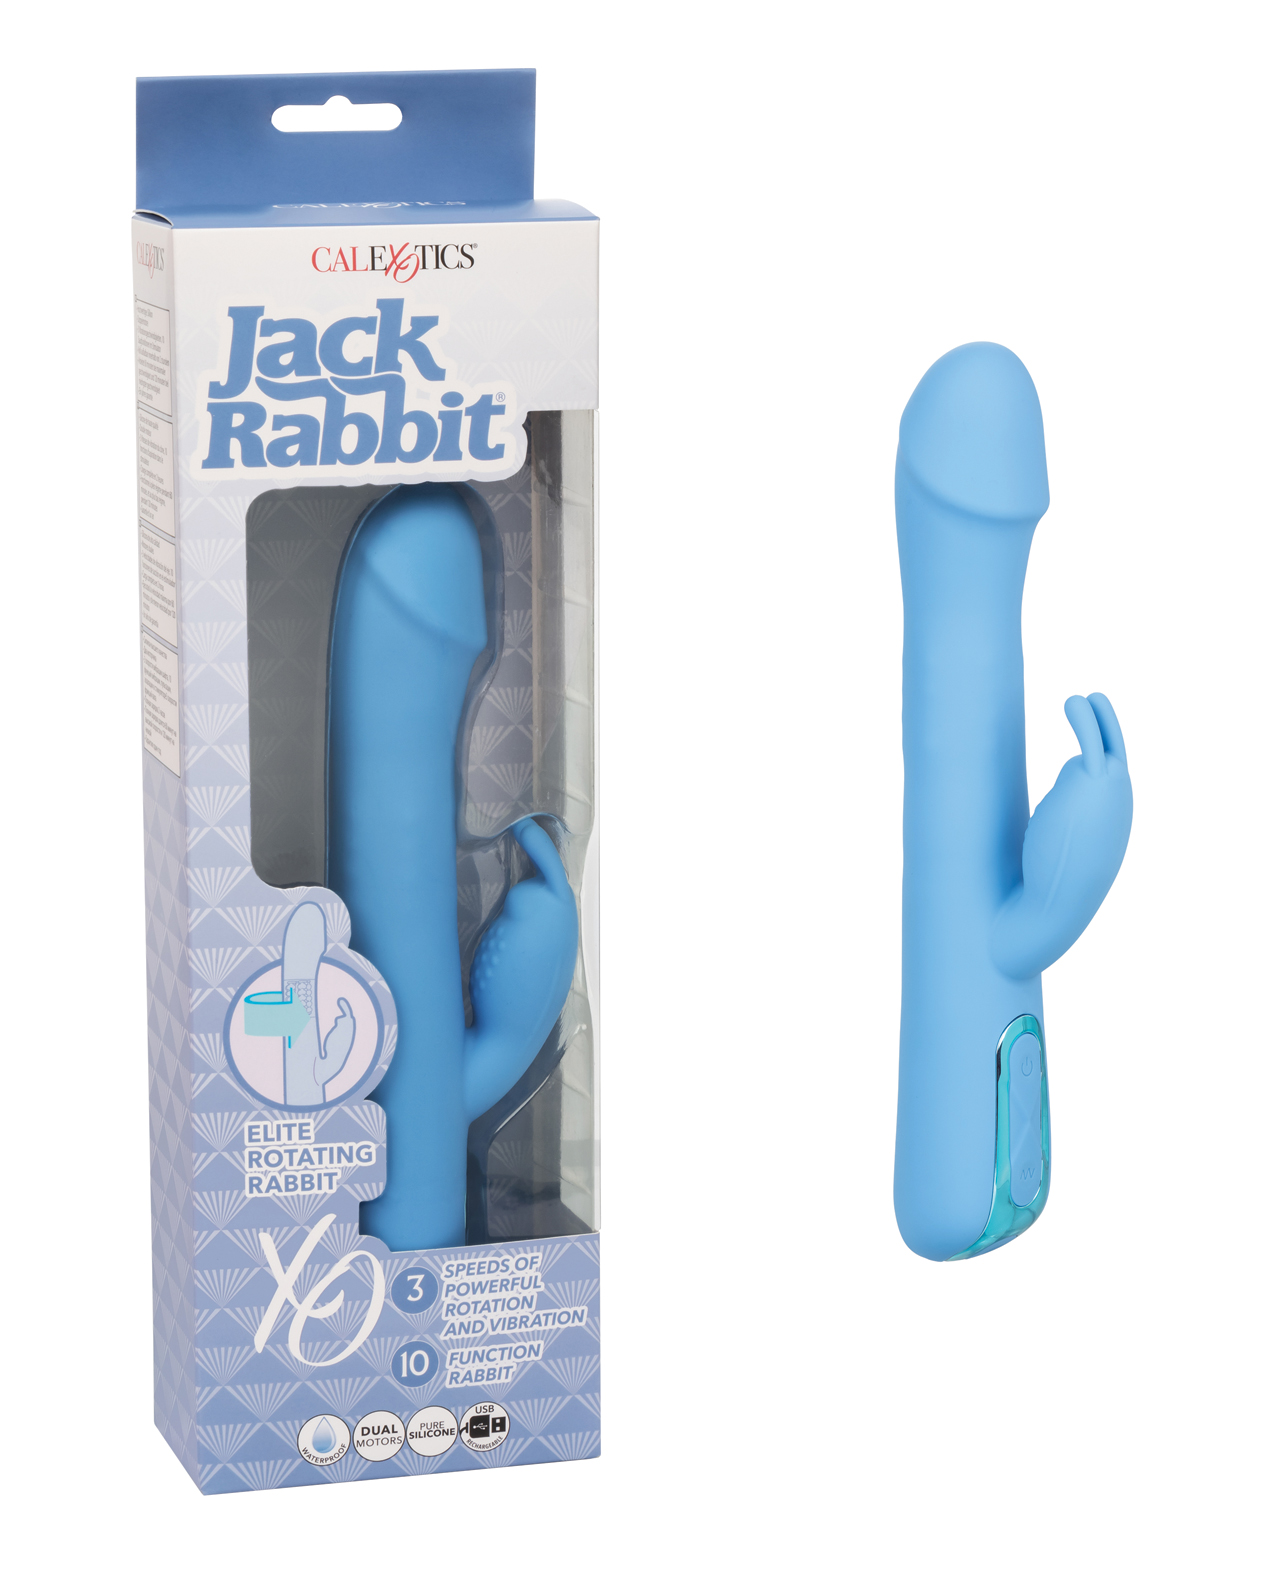 Blue Rotating Jack Rabbit toy sitting outside of its package.